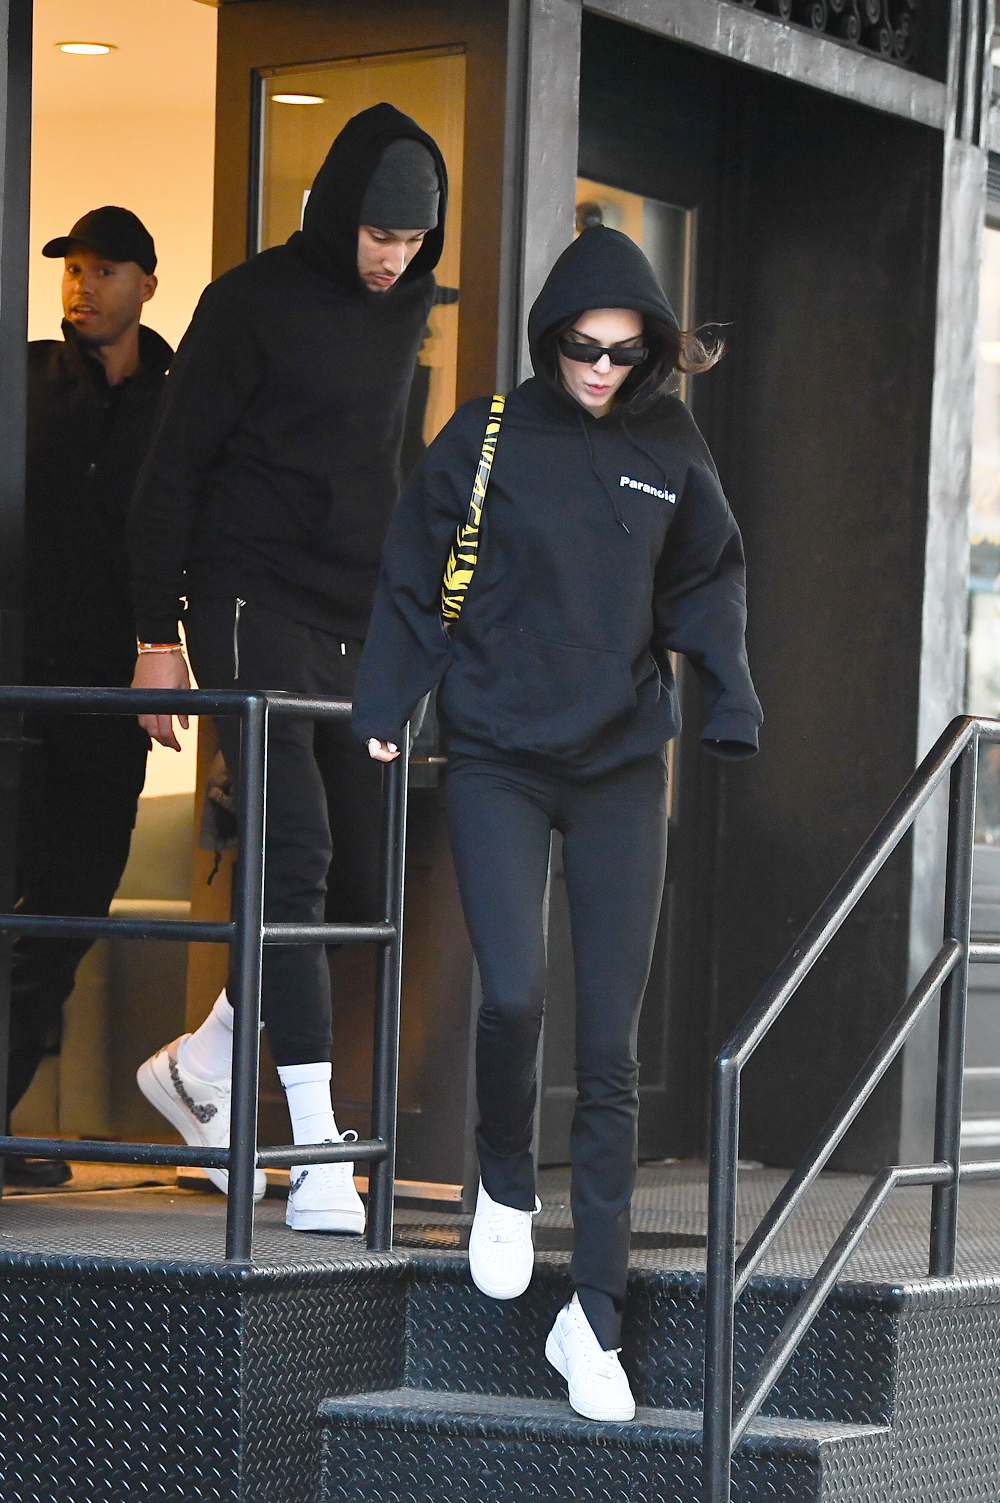 Kendall Jenner and boyfriend Ben Simmons have lunch at Bubby's in New York Pictured: Kendall Jenner,Ben Simmons Ref: SPL5141398 190120 NON EXCLUSIVE Photo By: Robert O ' Neil / SplashNews.com Splash News and Pictures Los Angeles: 310-821-2666 New York: 212-619-2666 London: +44 (0)20 7644 7656 Berlin: +49 175 3764 166 photodesk@splashnews.com Global Rights 